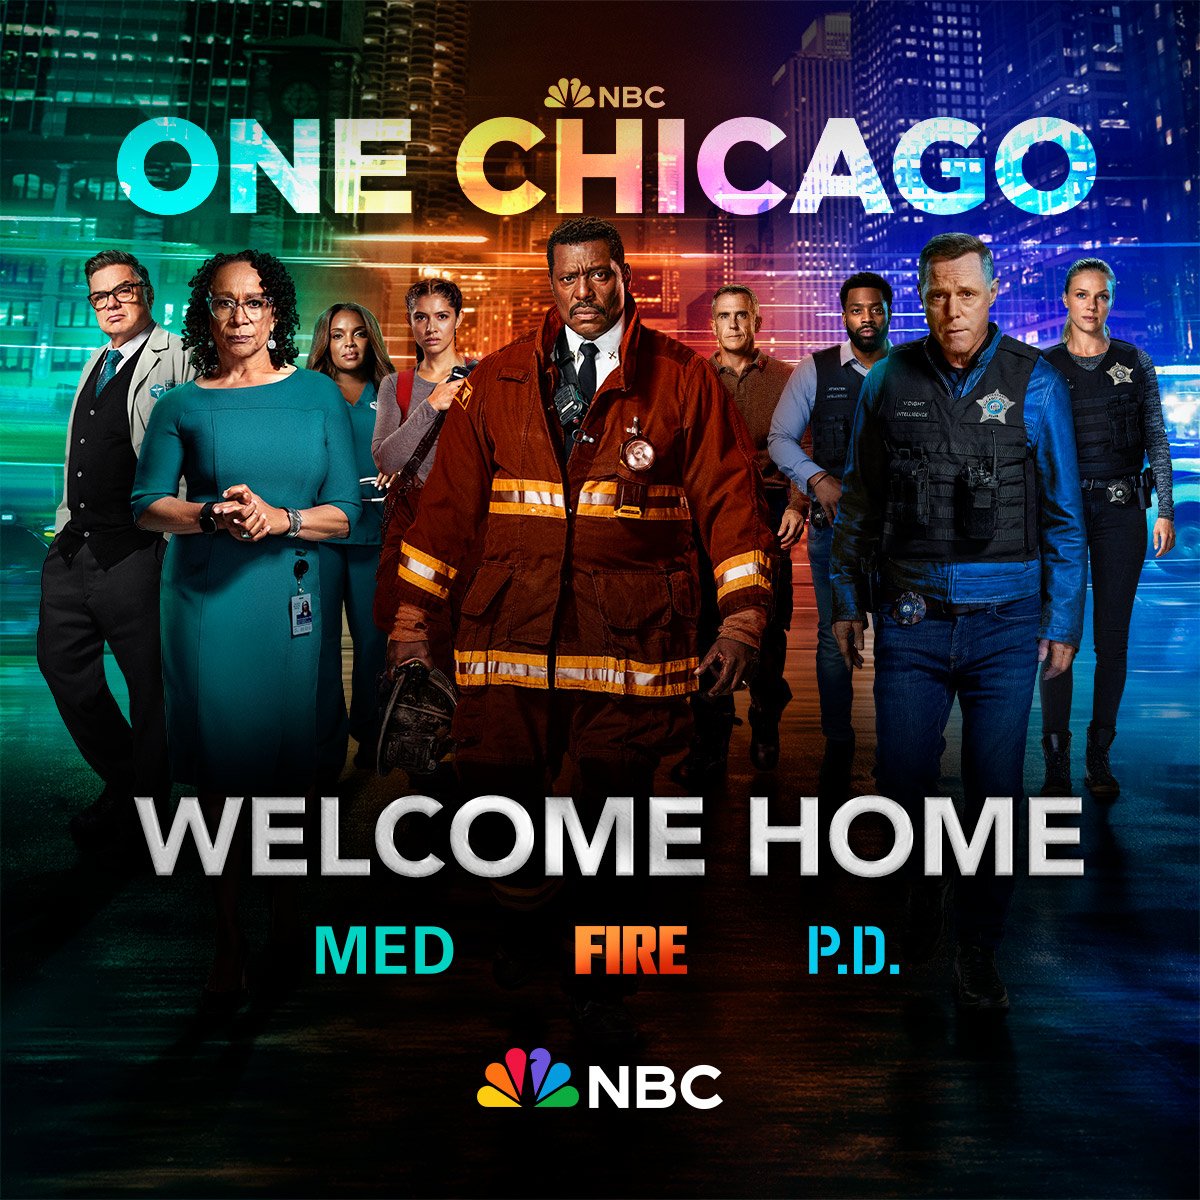 Good news, ChiHards: Chicago Wednesday is here! Check out a new episode of Med, Fire, and P.D., tonight on @nbc. It all gets started at 8/7c.